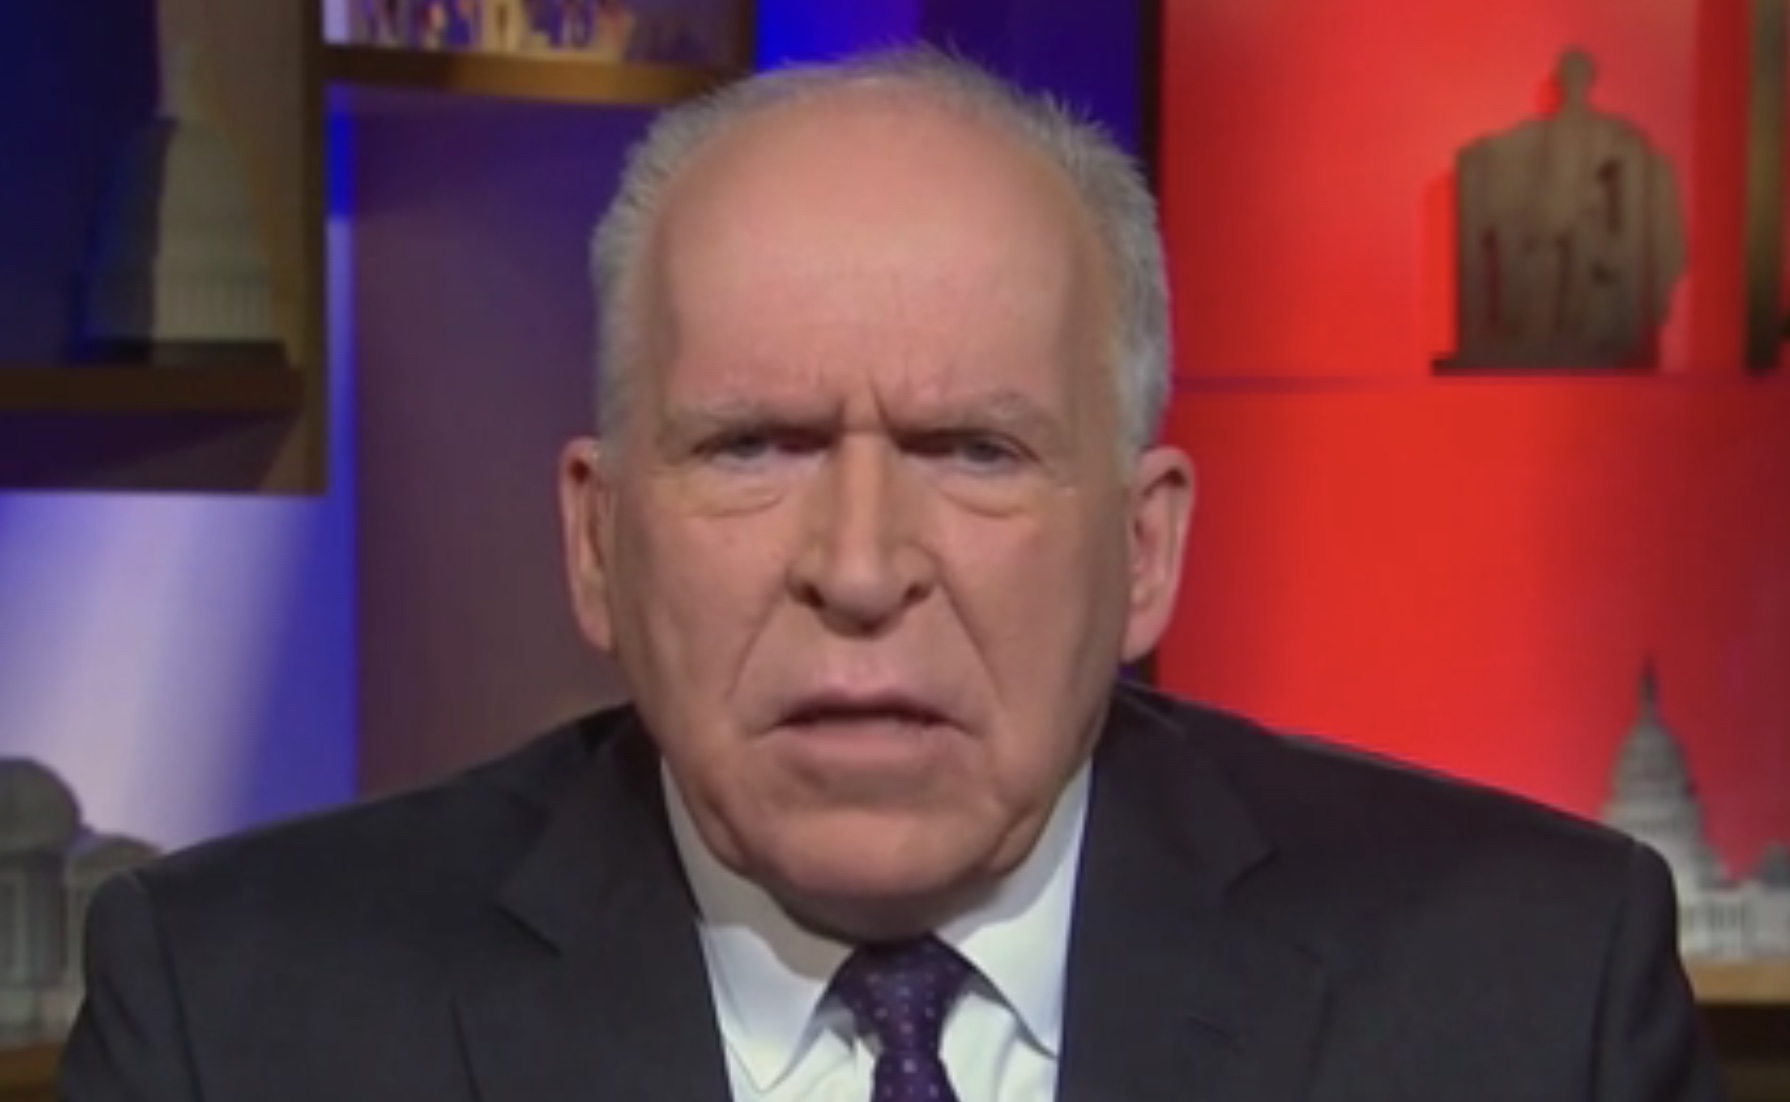 Former CIA Director John Brennan talks about the FISA abuse scandal with MSNBC’s Chris Hayes, Dec. 17, 2019. MSNBC screenshot